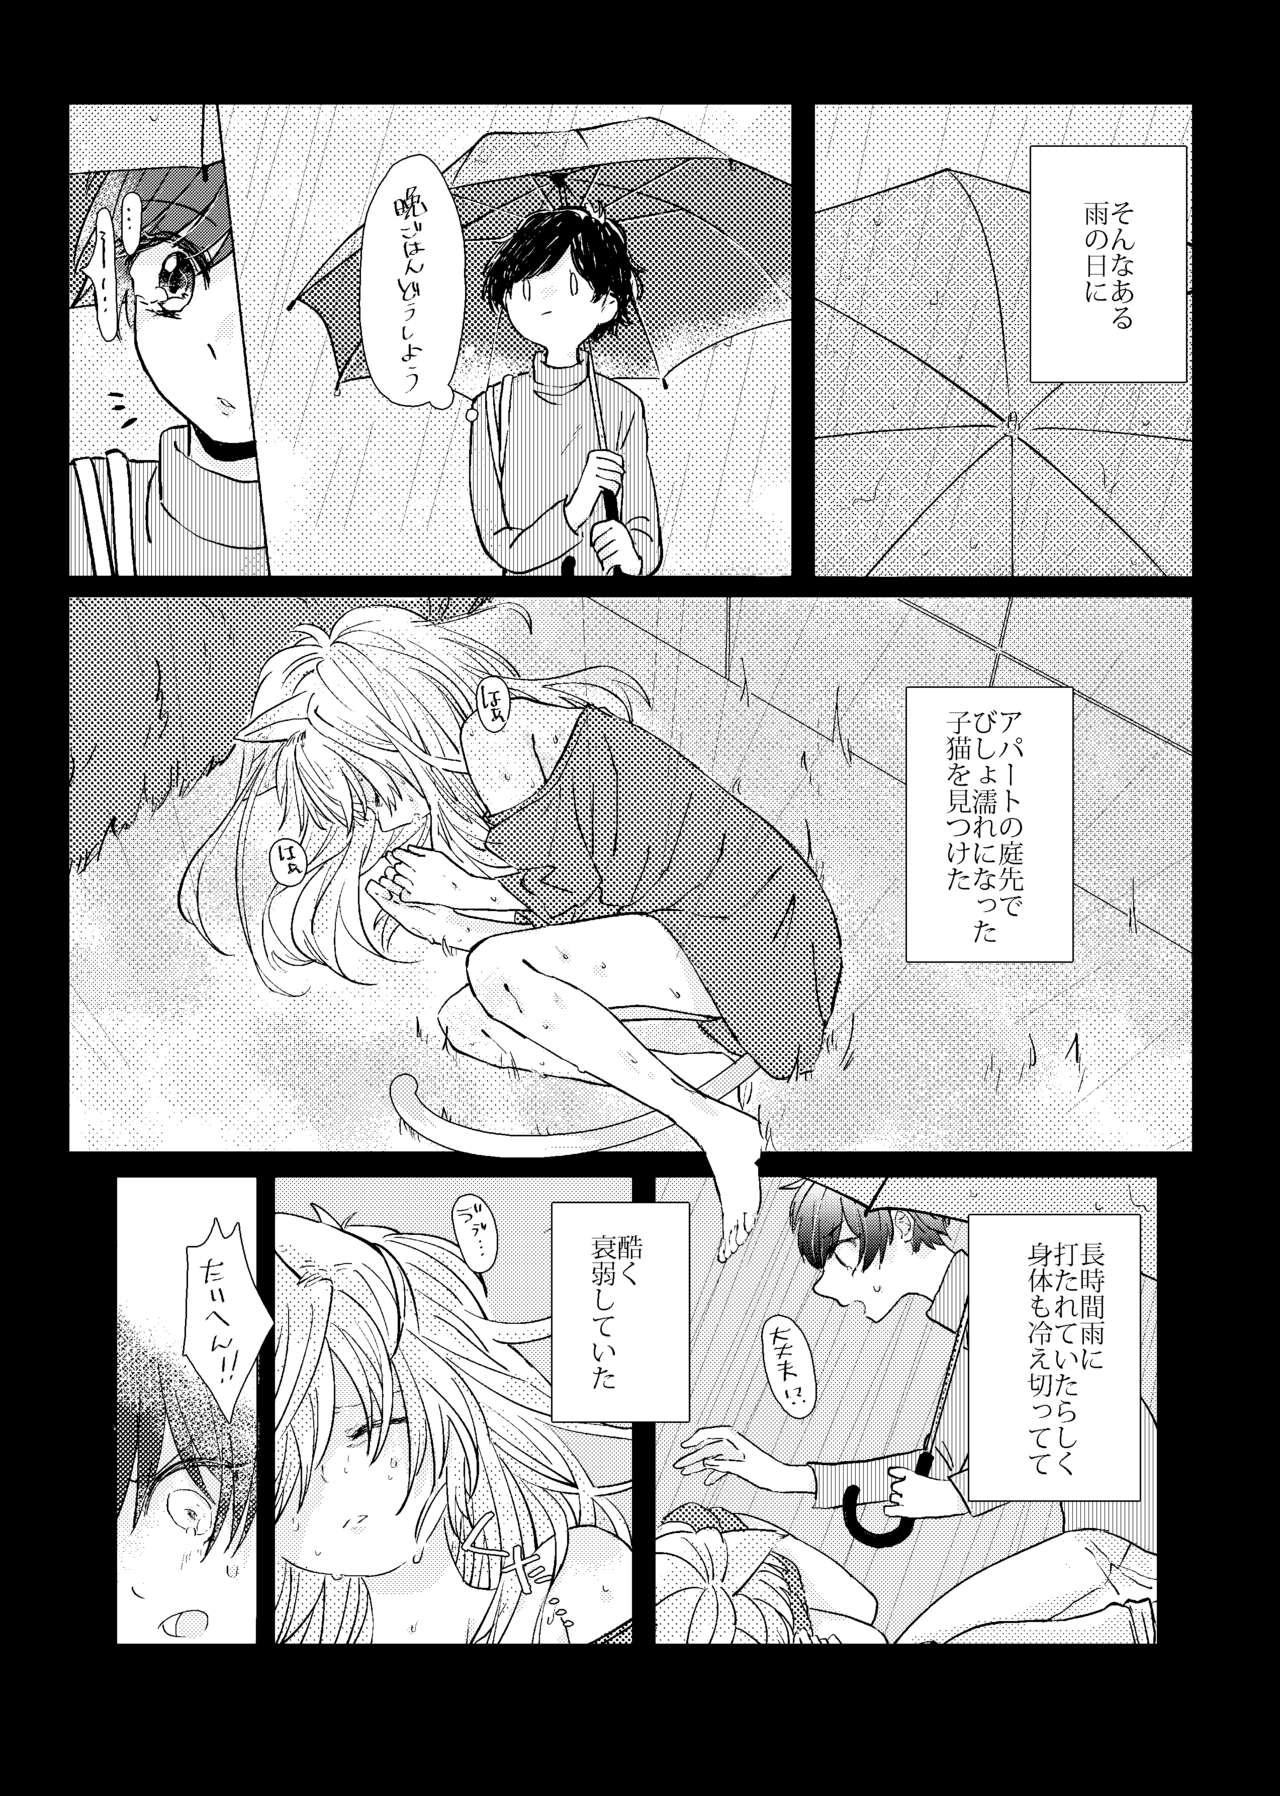 Family Porn MY SWEET SWEET CATGIRL!! - Banana fish Brother Sister - Page 6